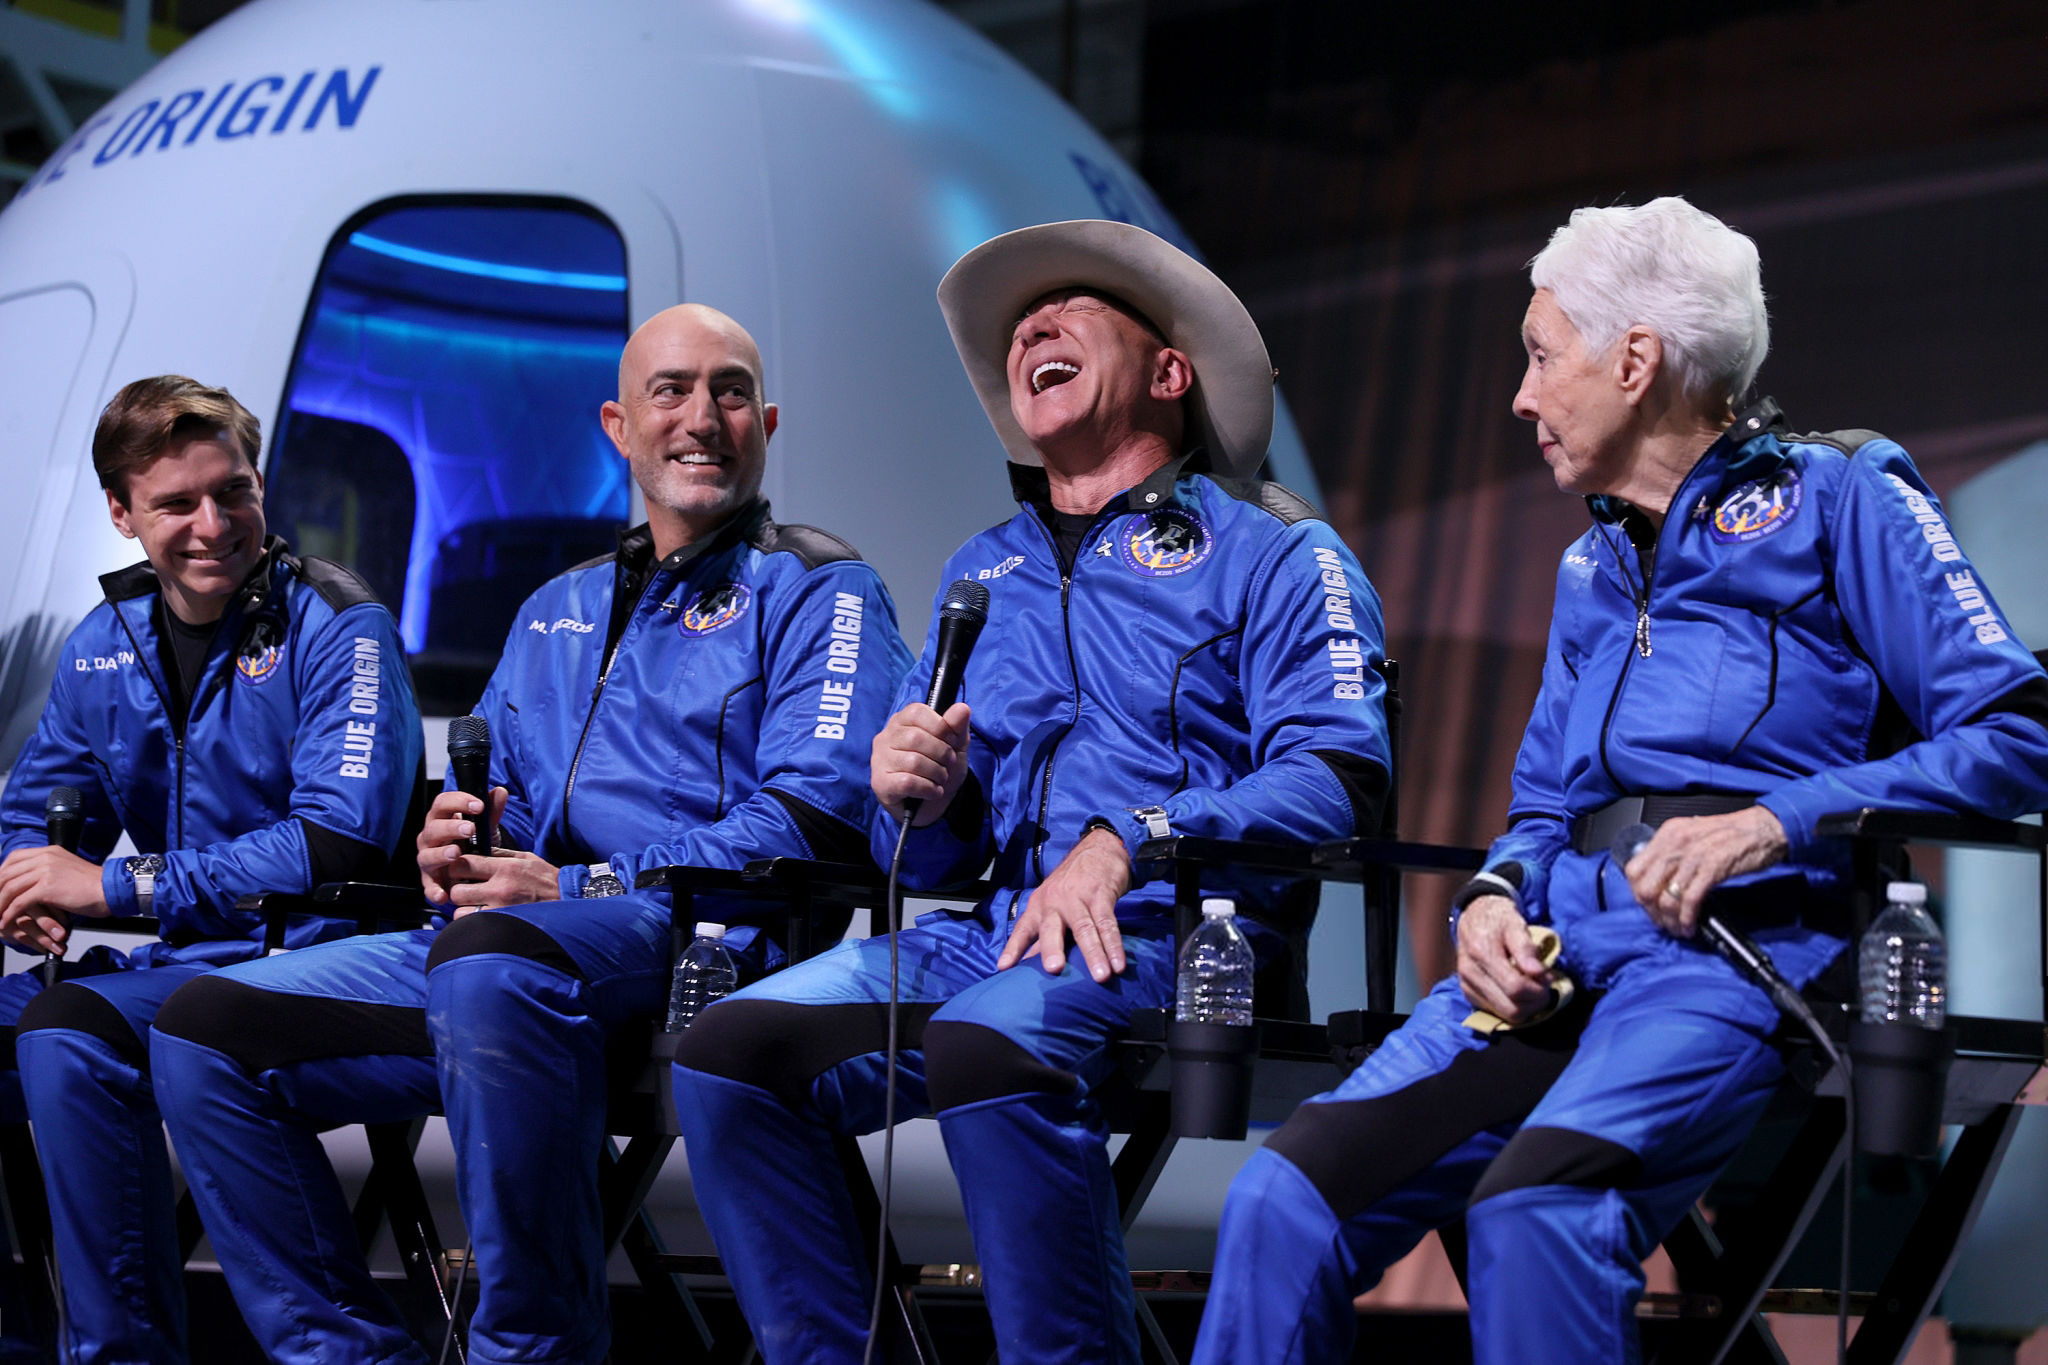 Jeff Bezos, center, with his brother, Mark Bezos, left, and Wally Funk, an aviator who became the oldest person to travel to space, after their Blue Origin flight on Tuesday in Van Horn, Texas.